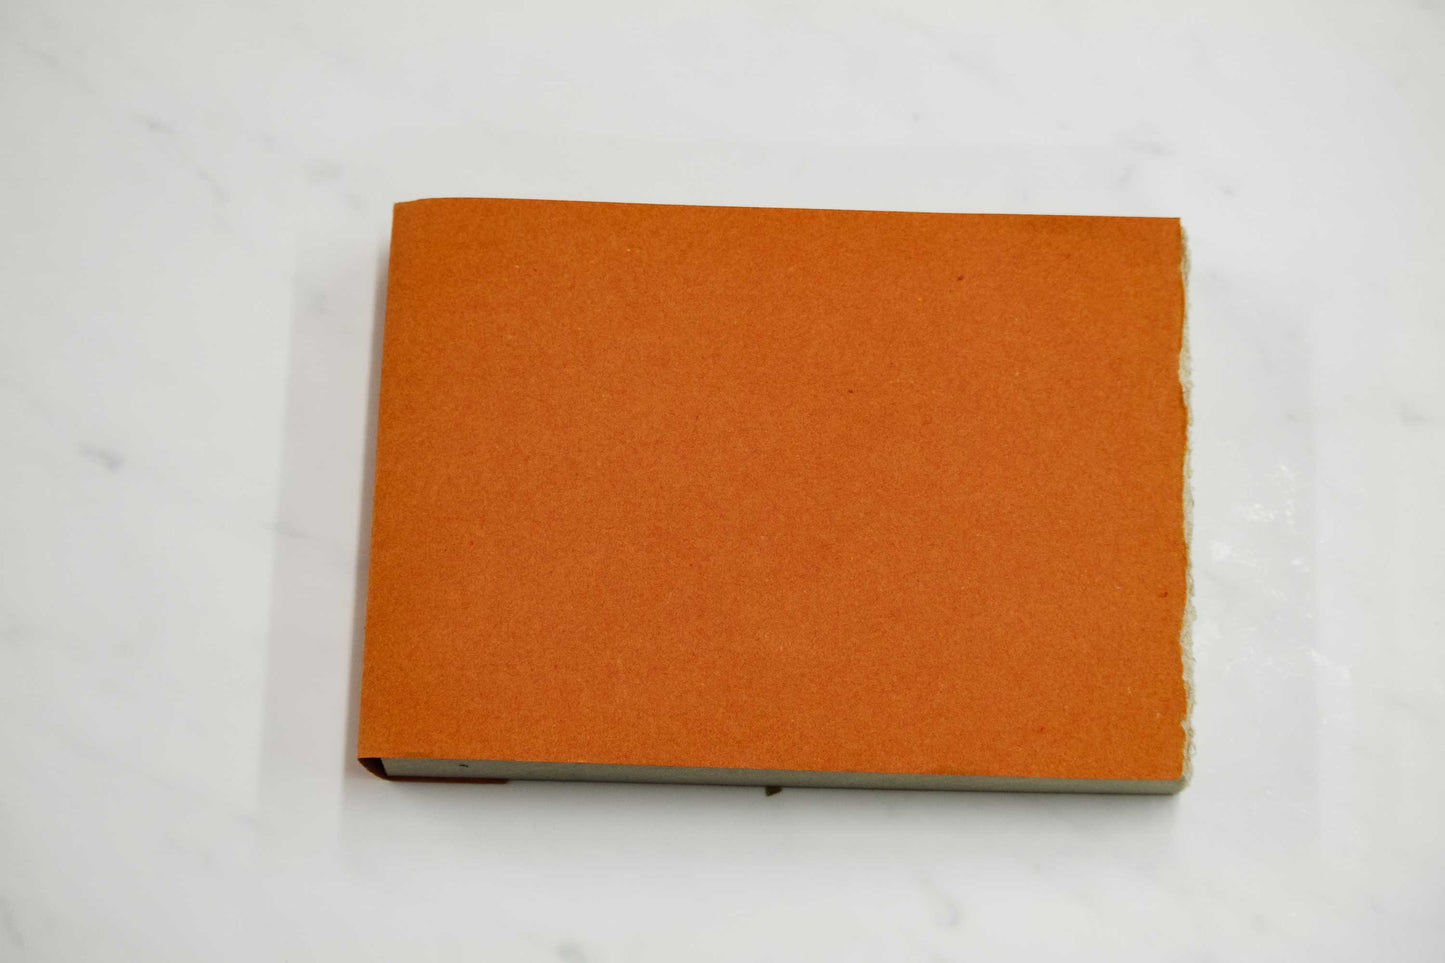 6-inch by 8-inch handmade Papeterie St. Armand cotton paper notepad with orange cover